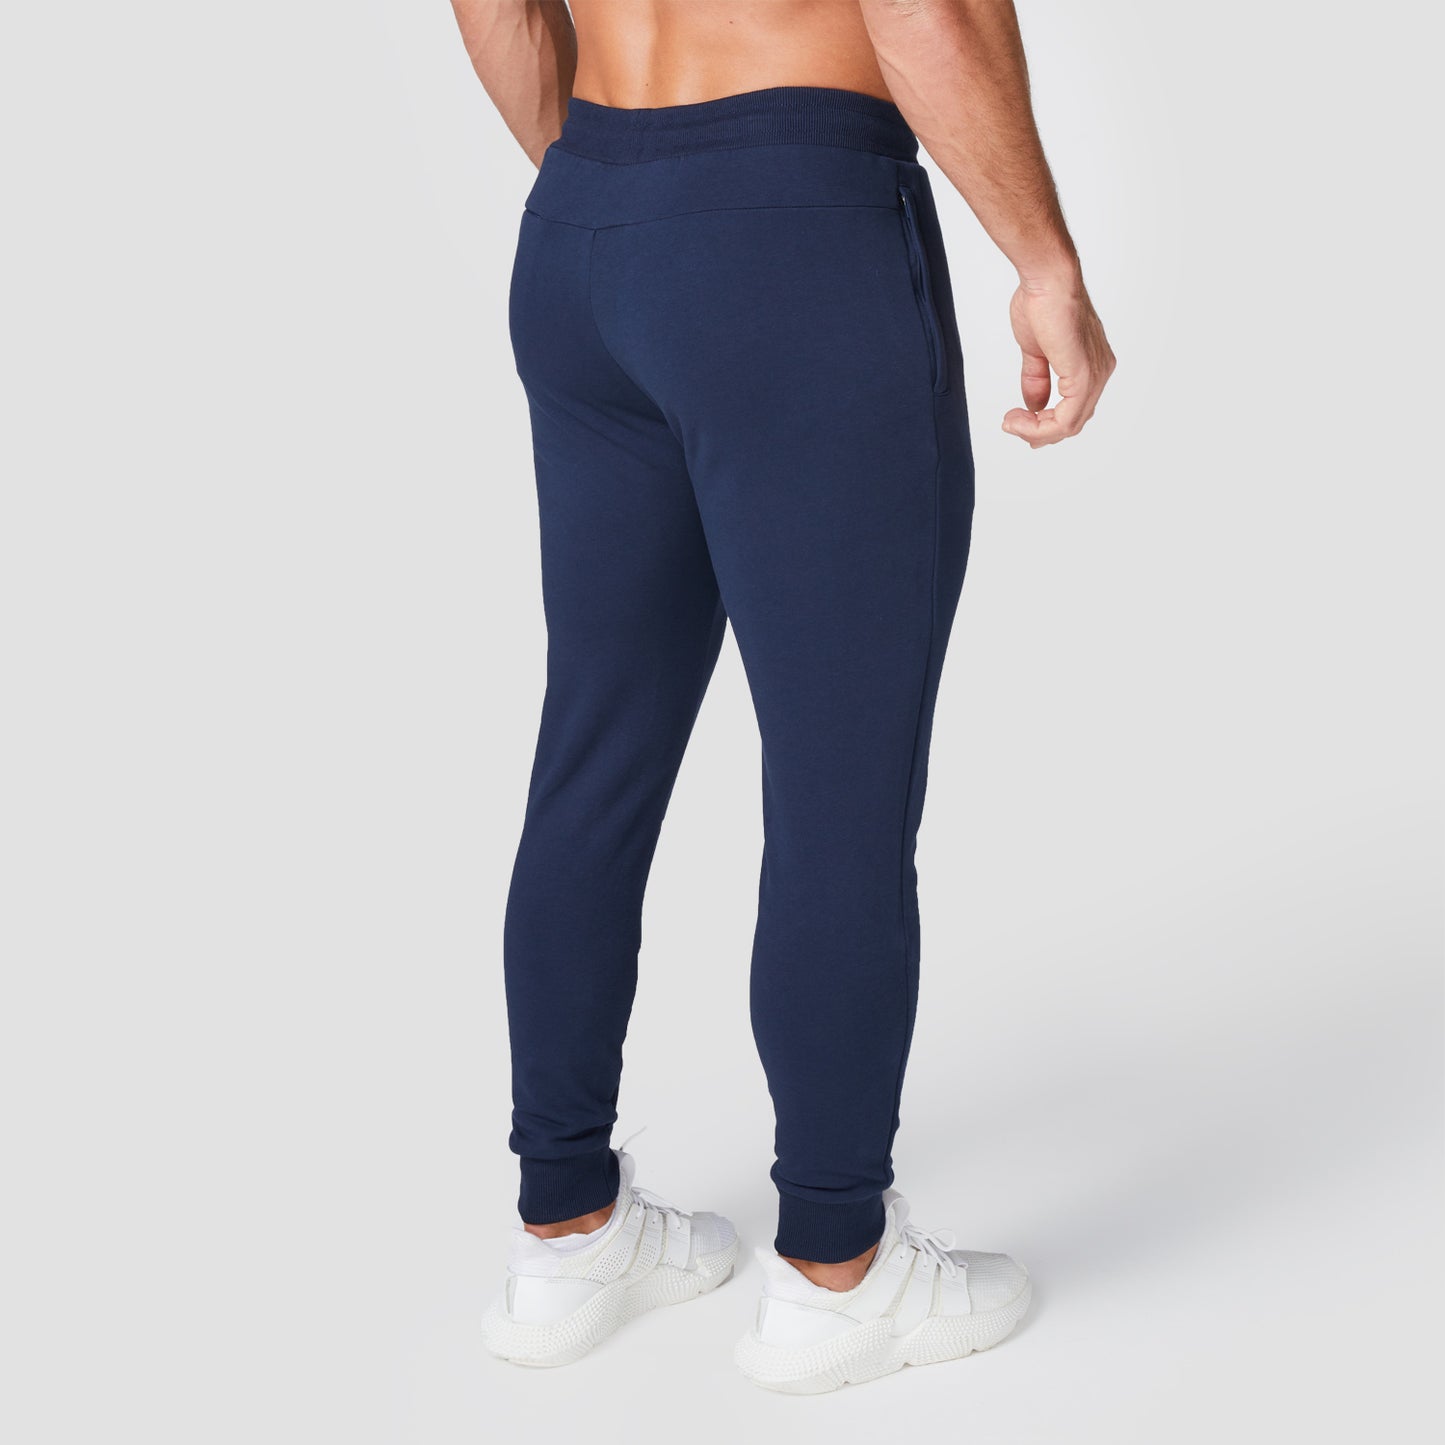 squatwolf-gym-wear-core-cuffed-joggers-navy-workout-pants-for-men